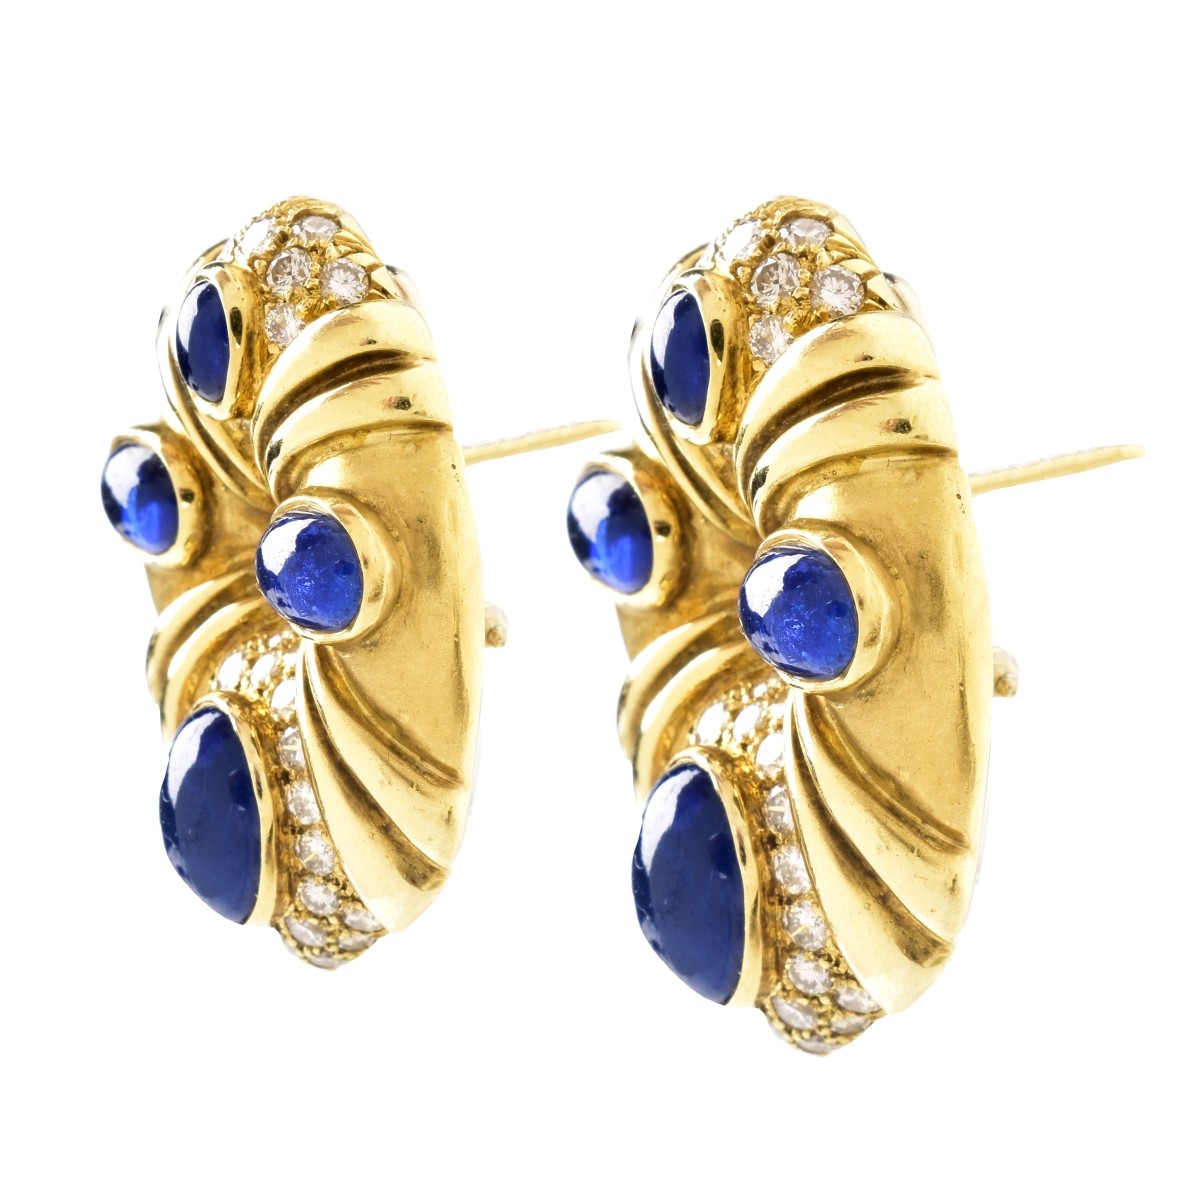 Vintage Sapphire, Diamond and 18K Gold Earrings